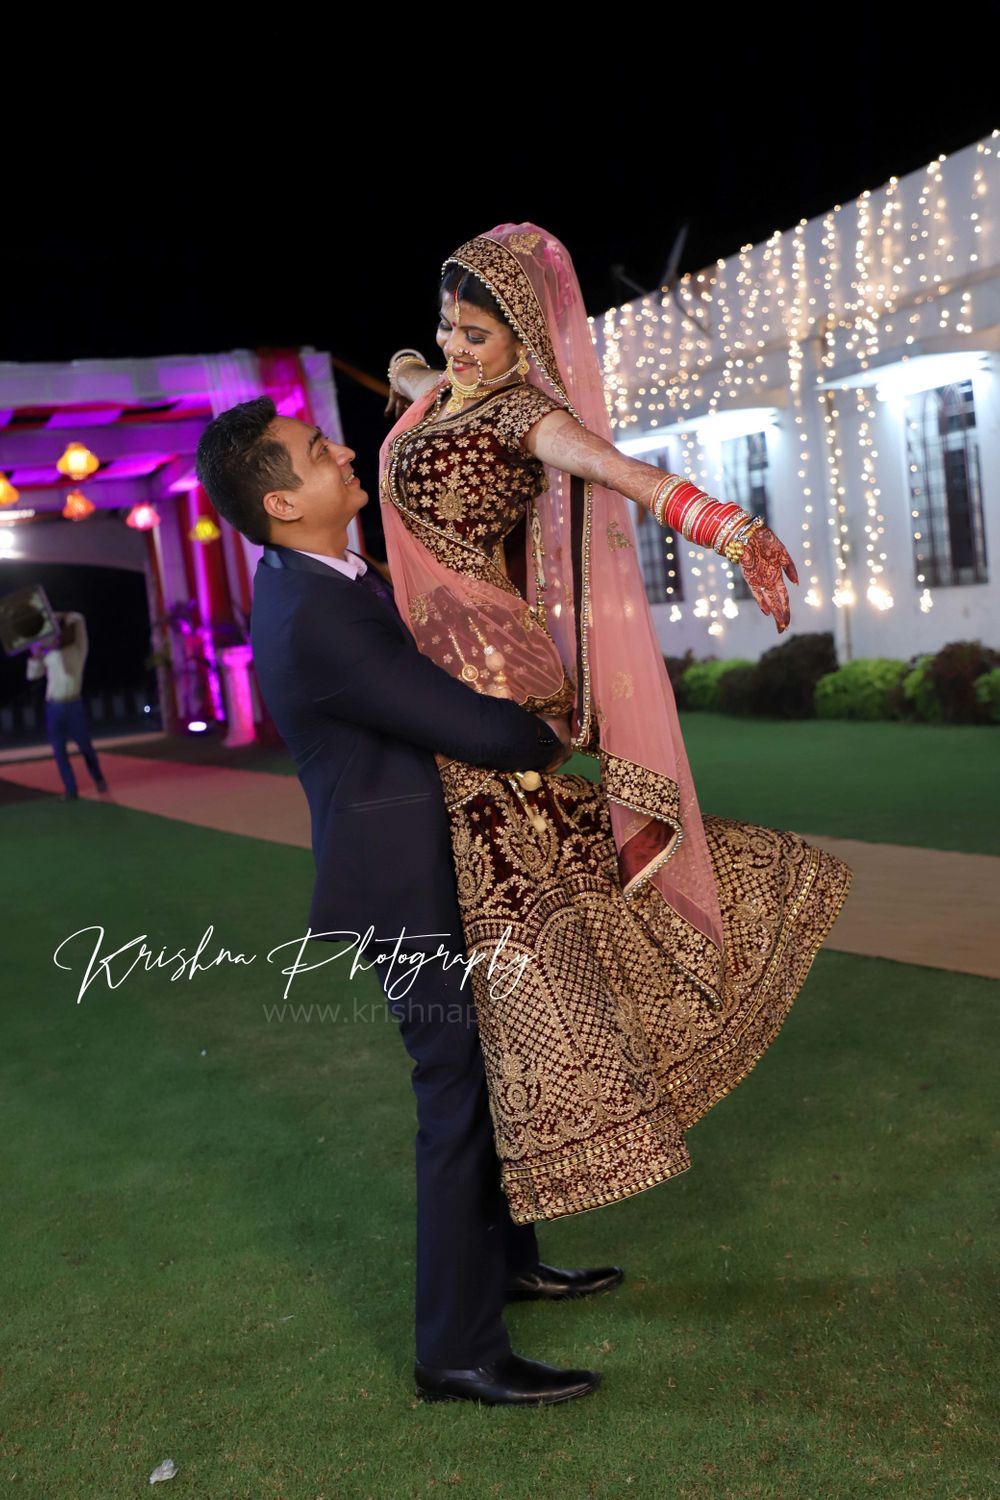 Photo From wedding photography - By Krishna Photography